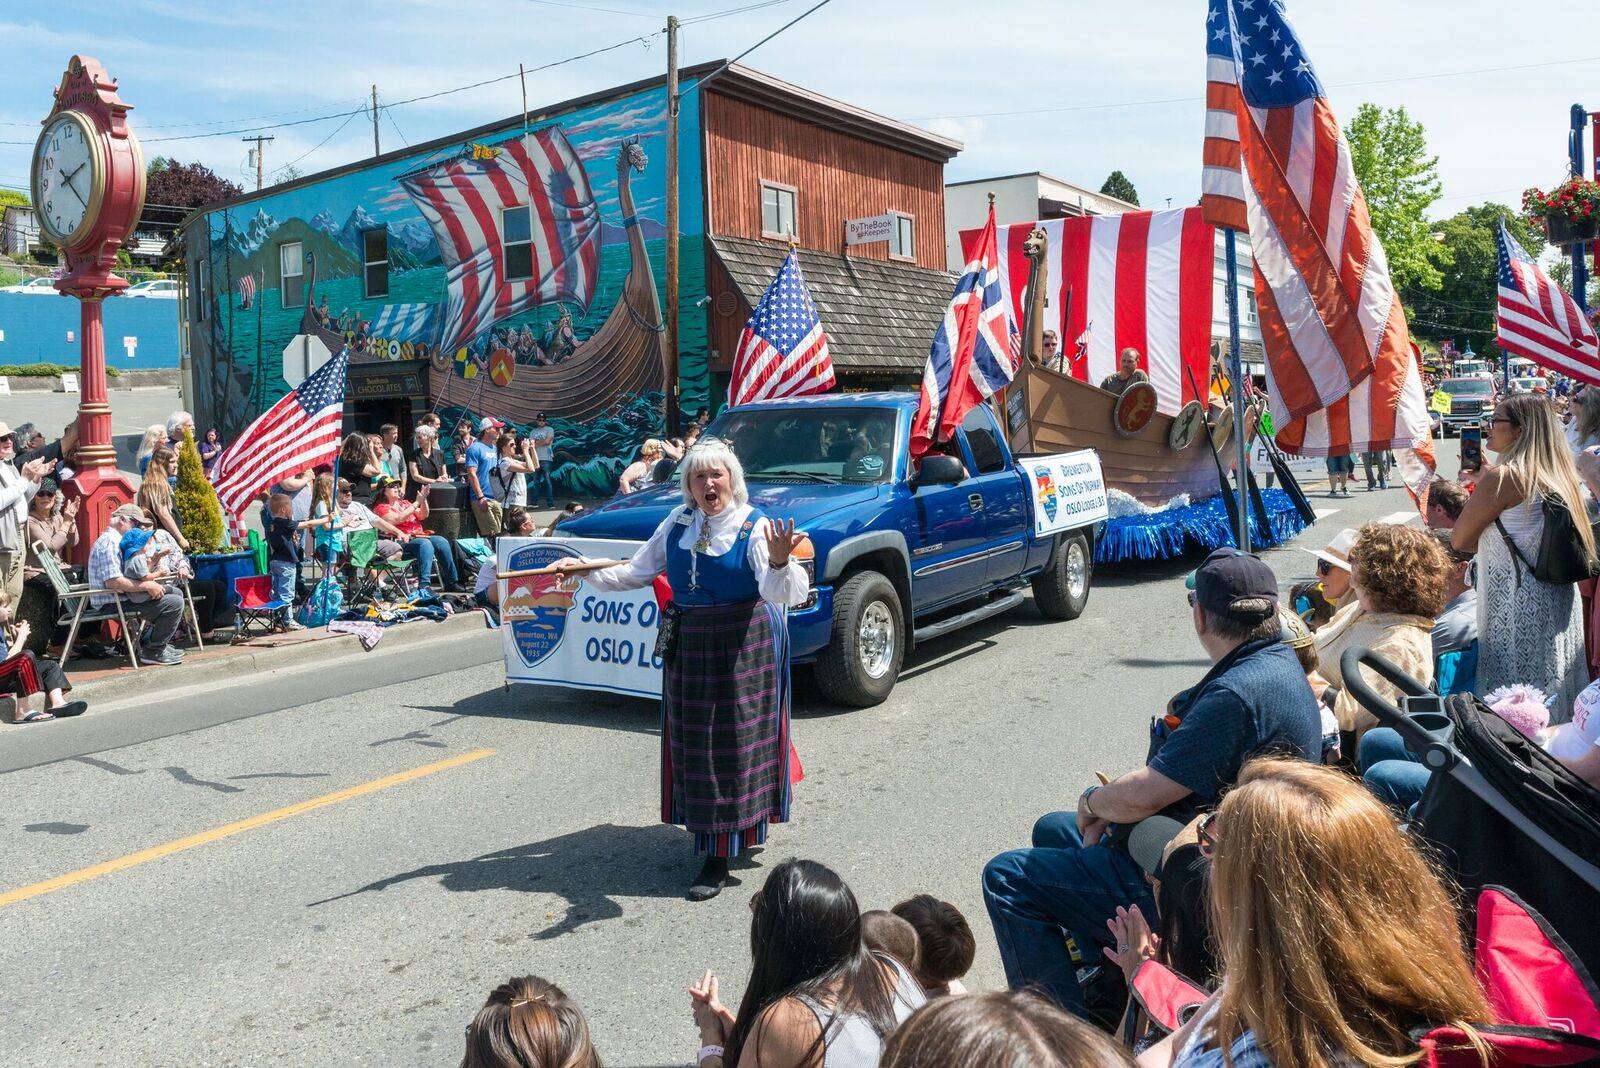 The Bremerton Sons of Norway Oslo Lodge longship makes its way through Poulsbo’s Front Street during the 2019 Viking Fest parade. Brian Judge / Kitsap News Group.